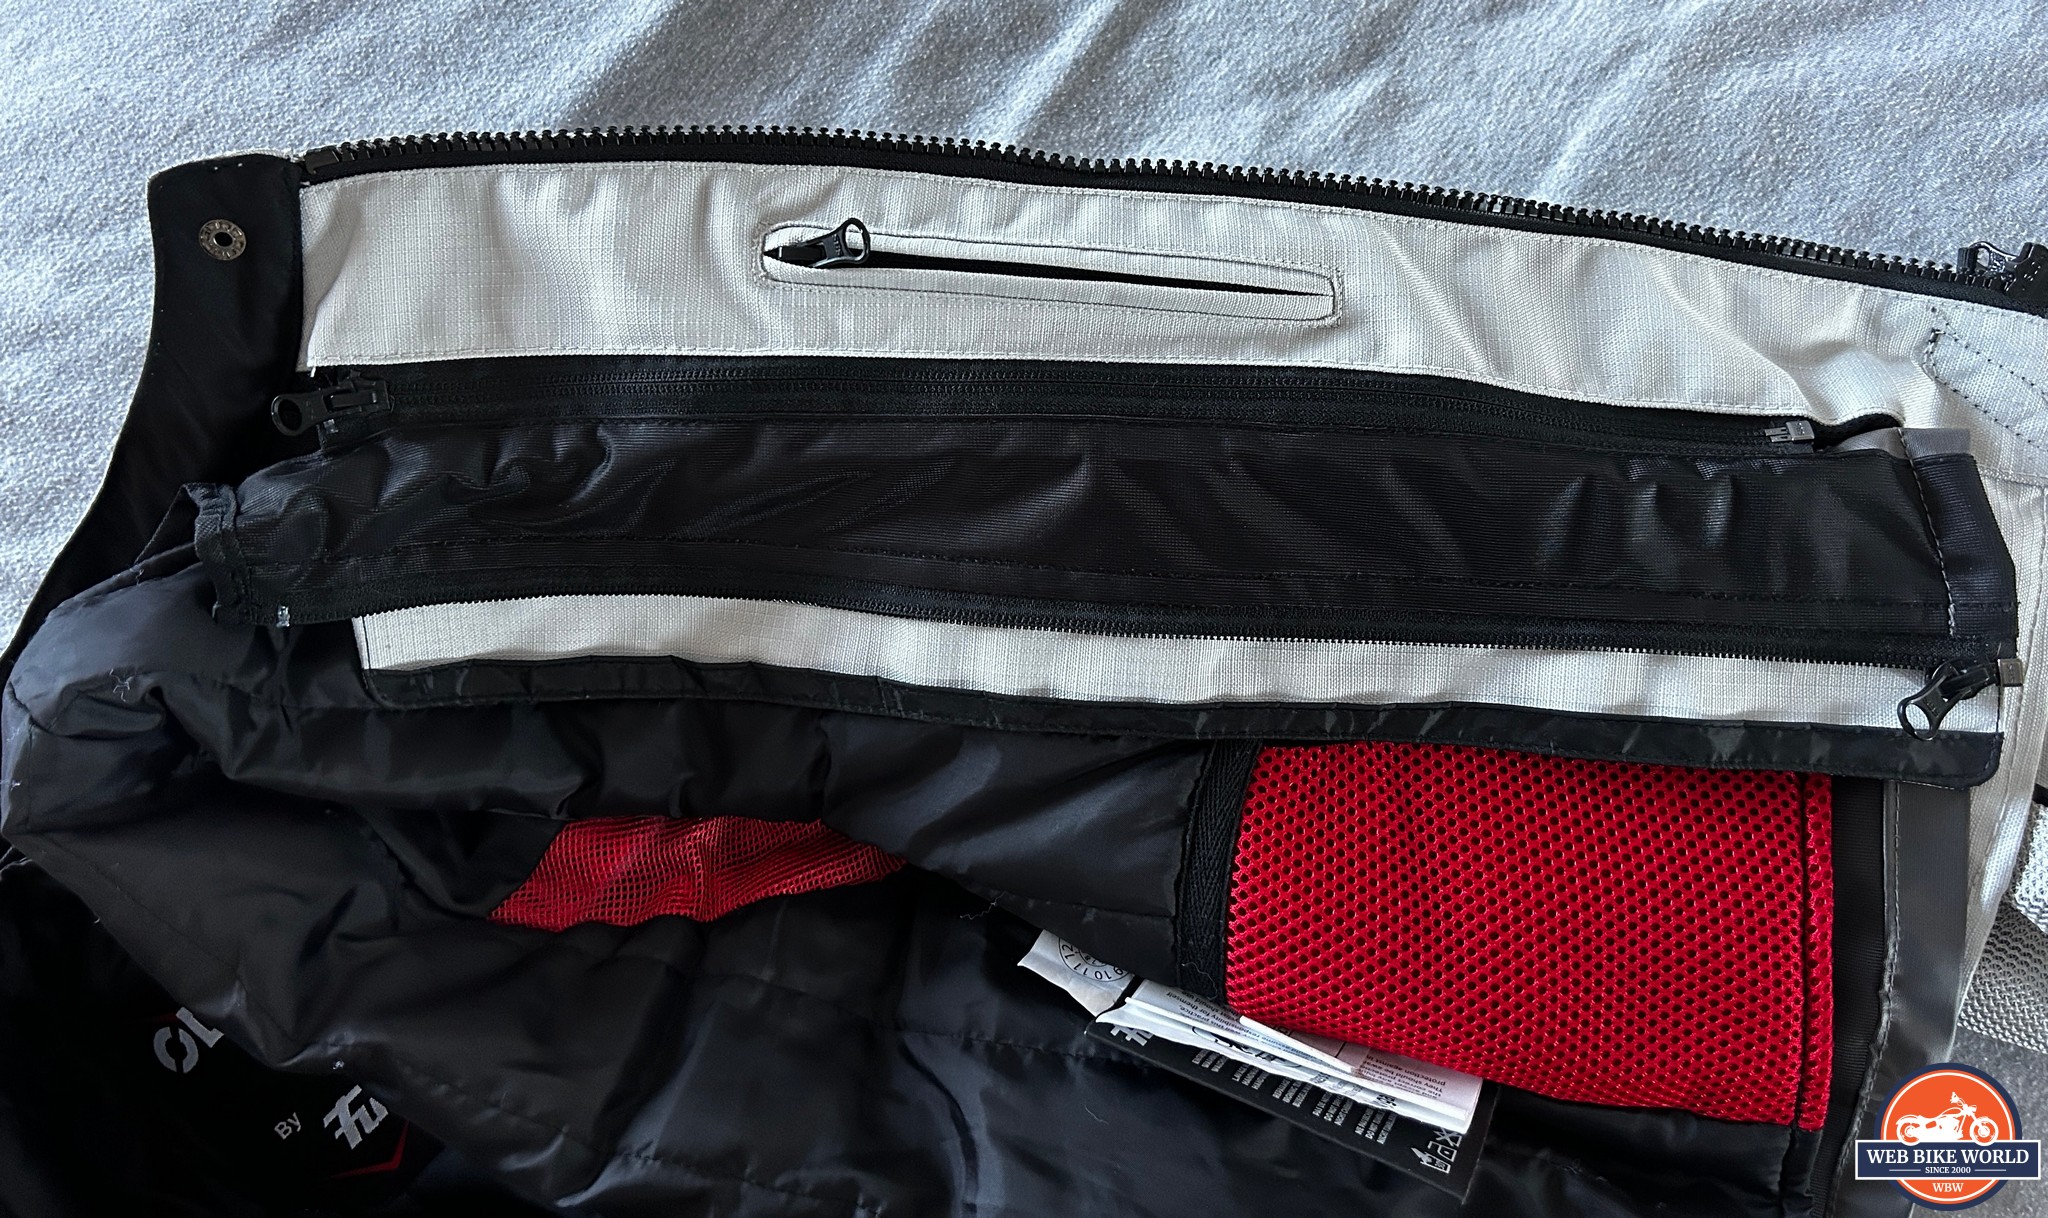 Closeup of the zipper holding the interior lining in